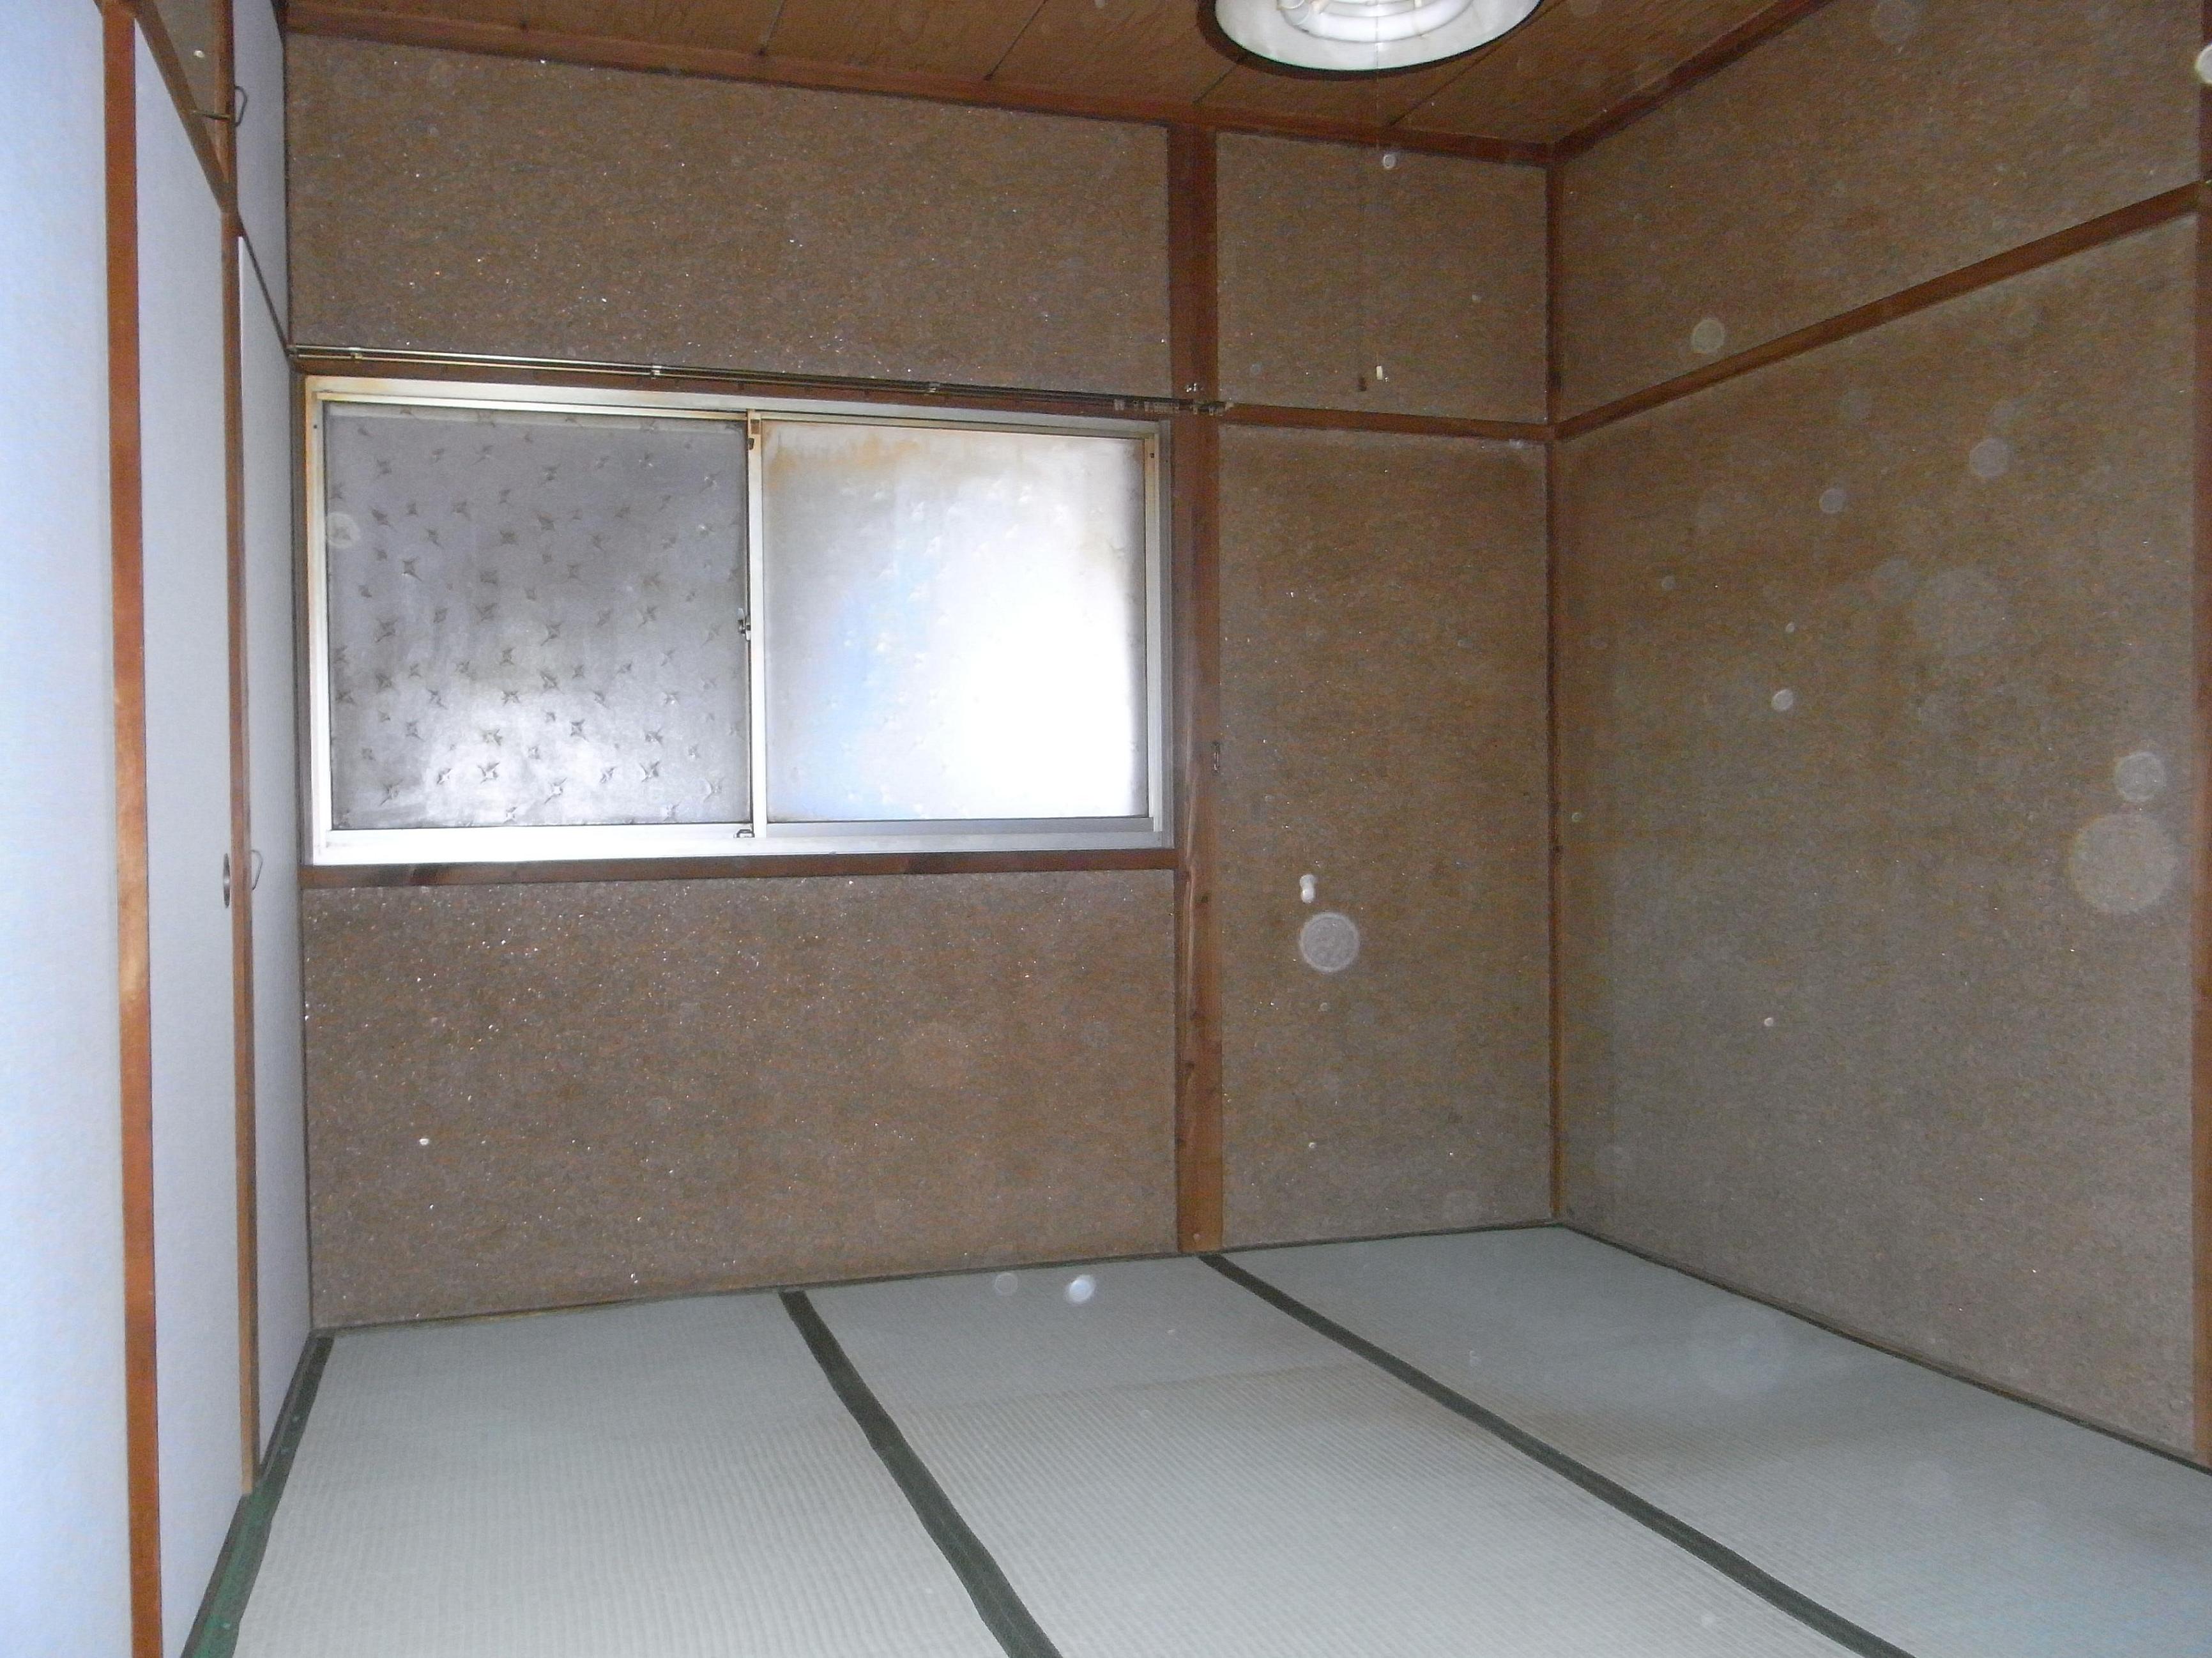 Living and room. North Japanese-style room 6 tatami